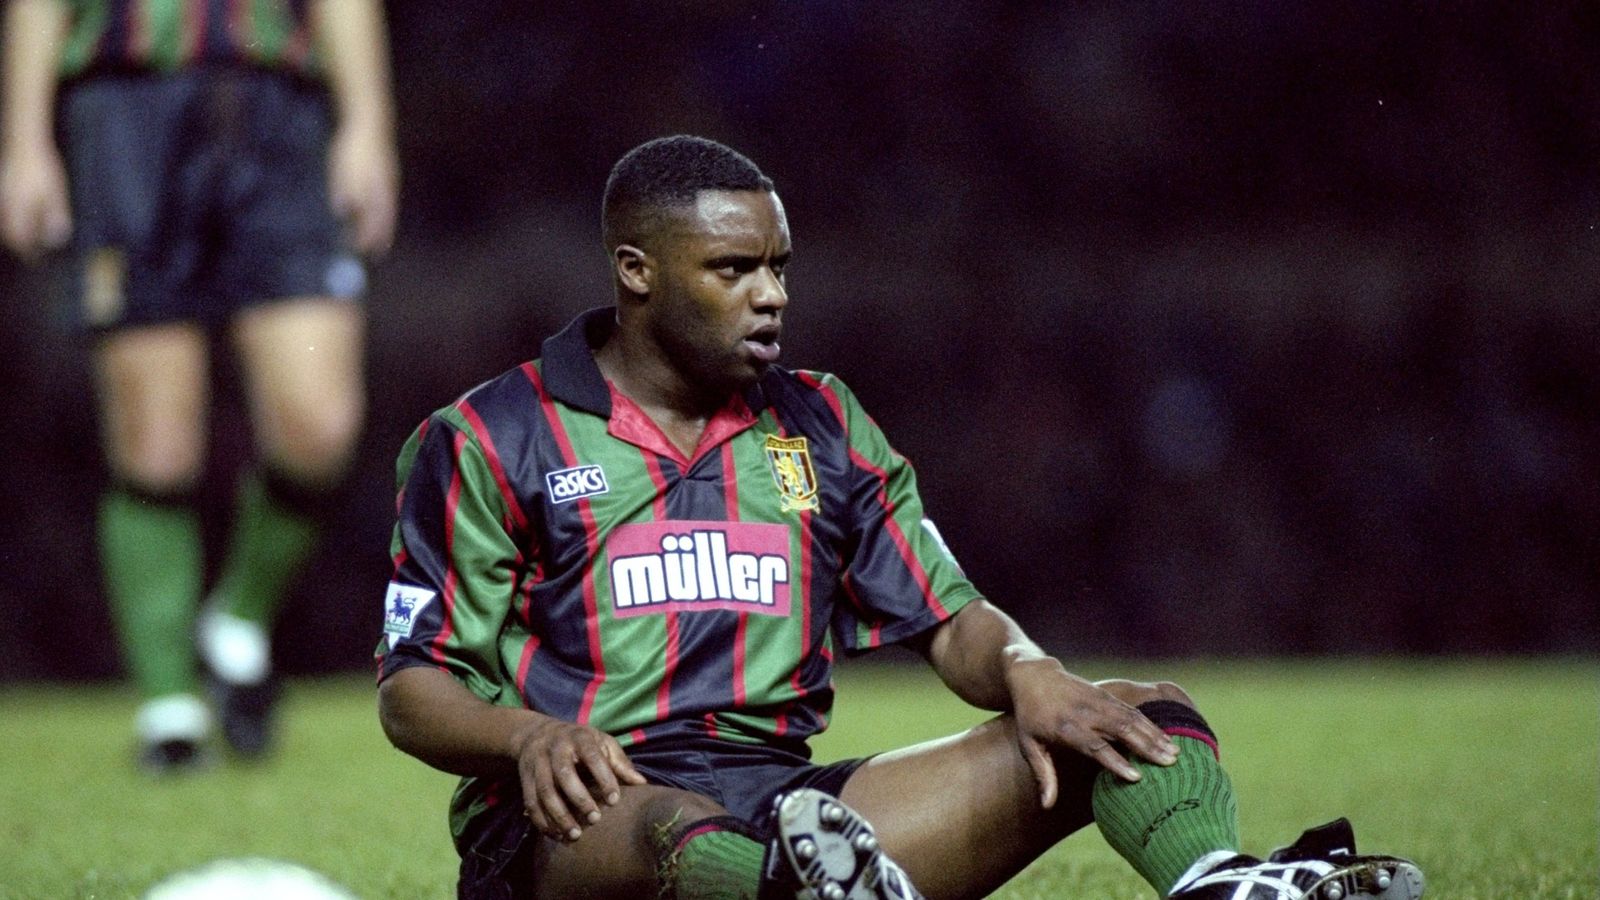 Dalian Atkinson's Football Career In Pictures